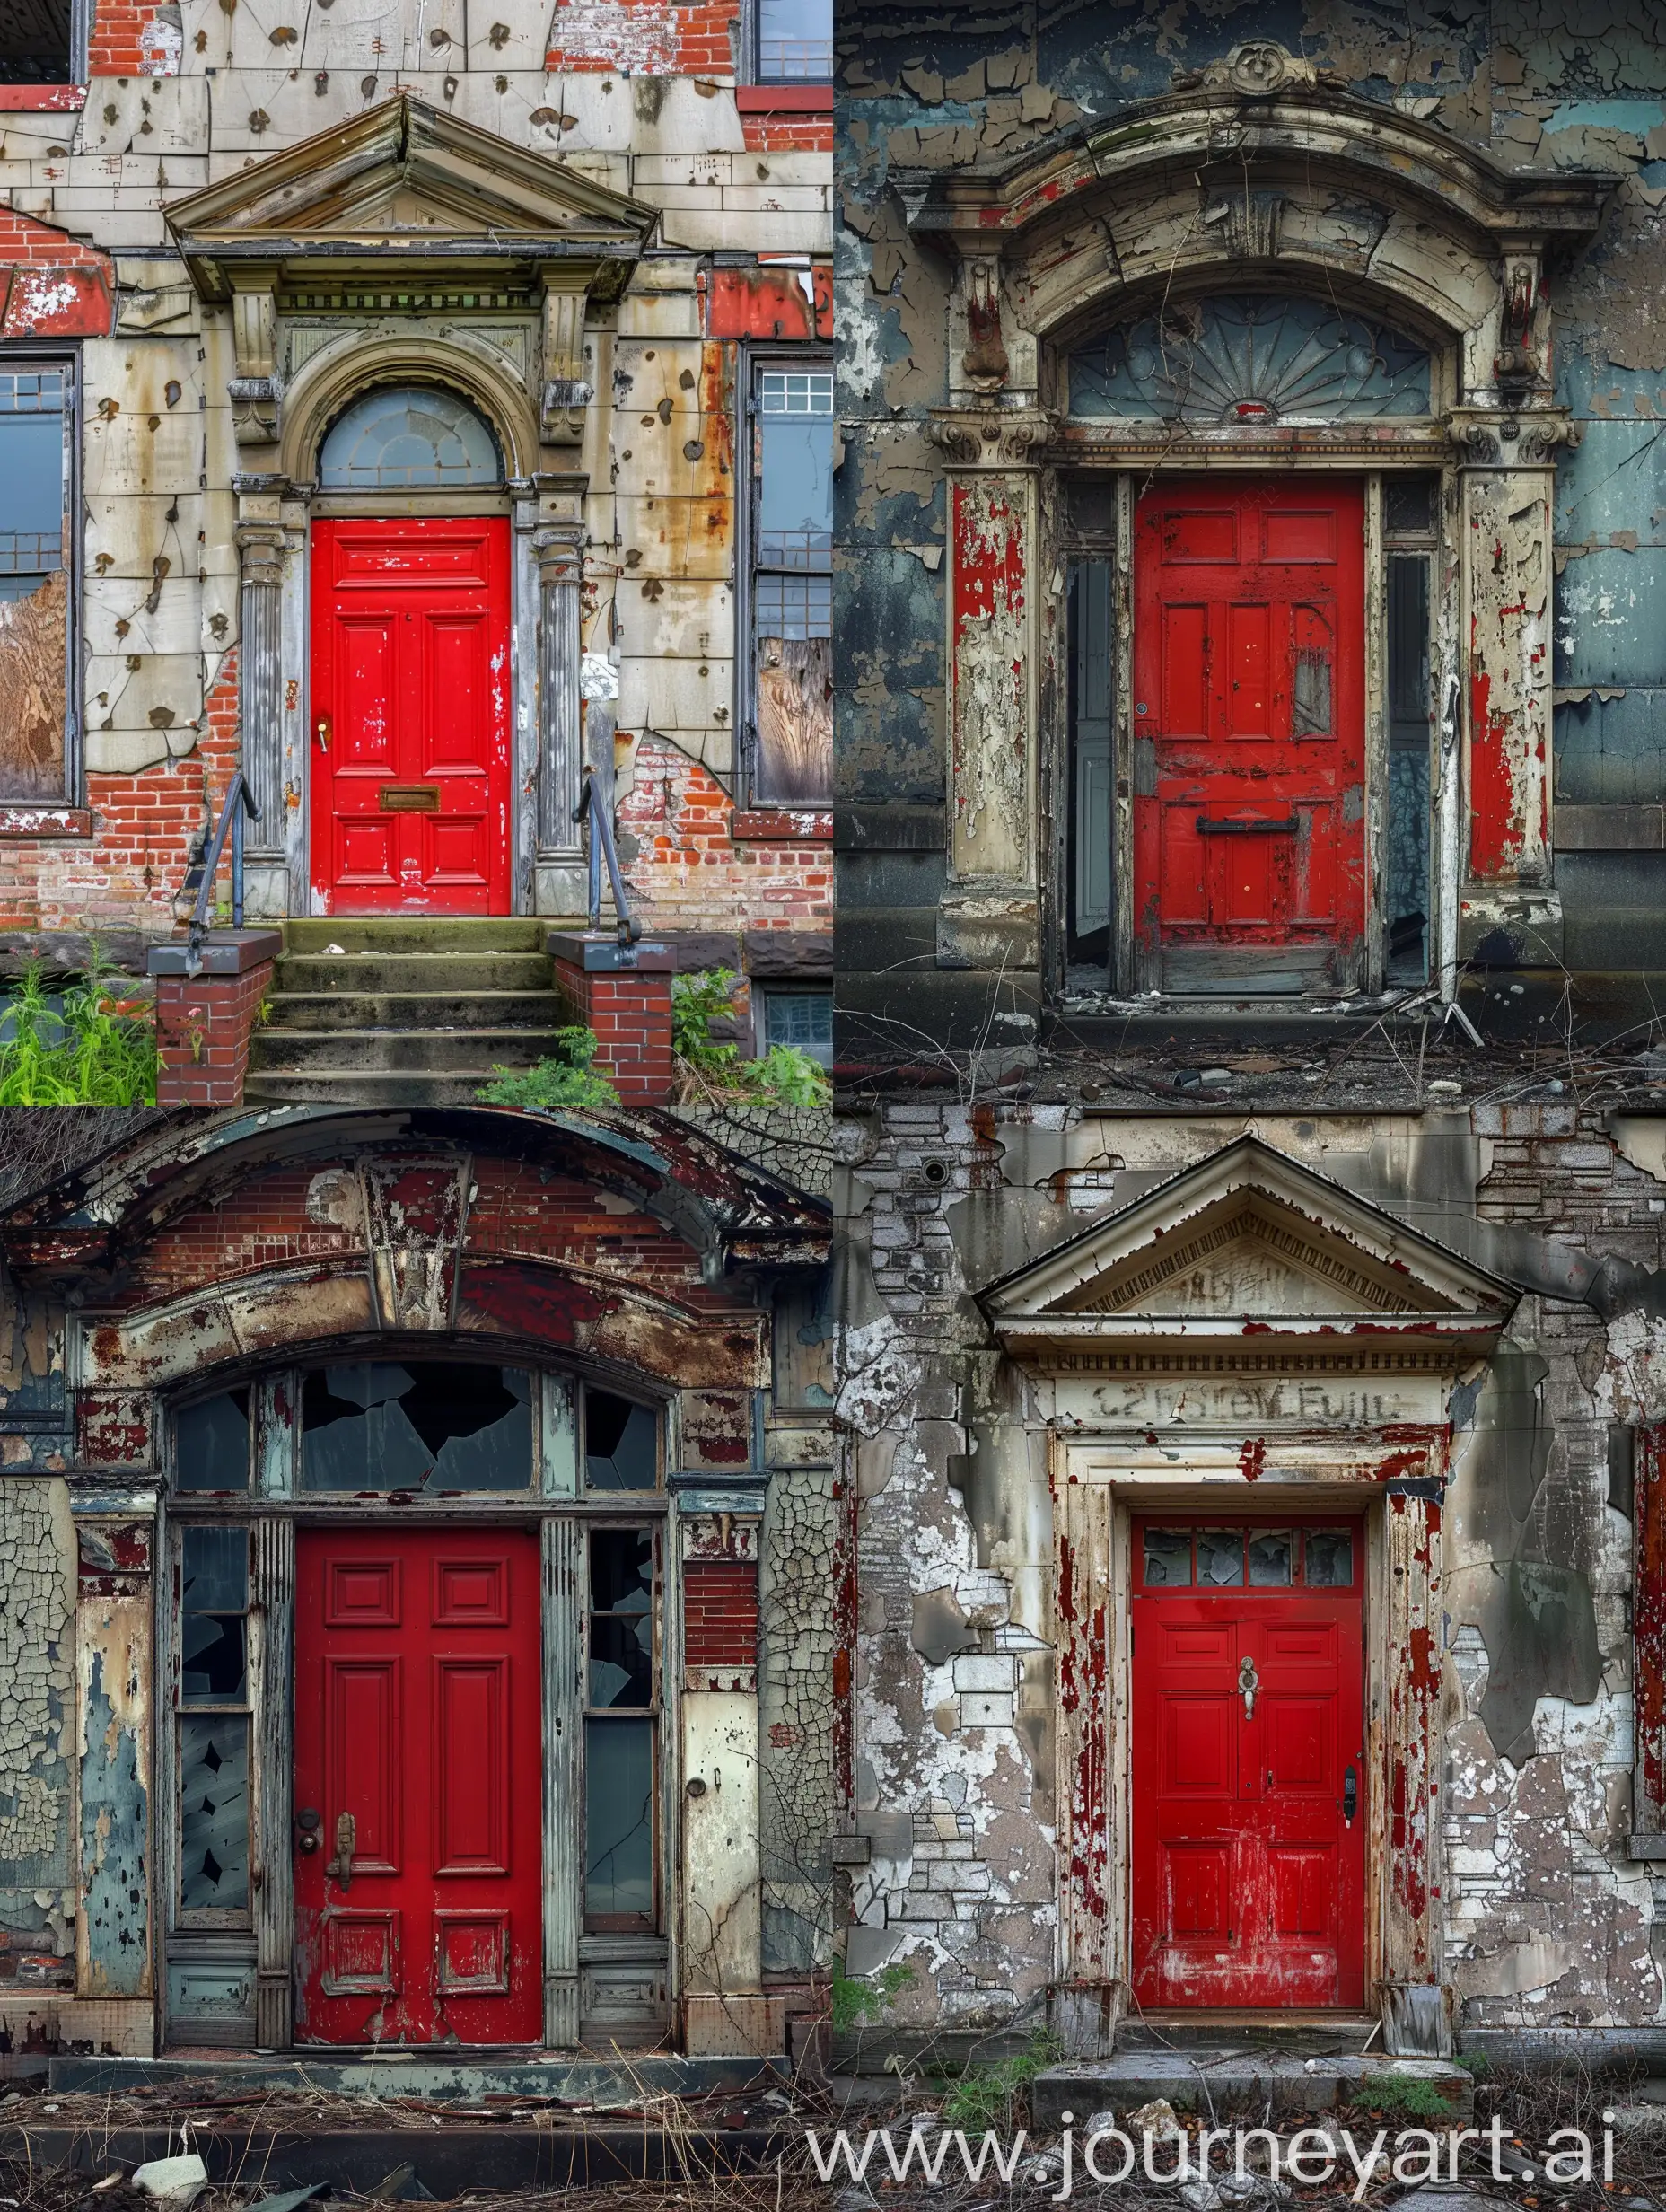 Abandoned-Mansion-with-Striking-Red-Door-Eerie-Beauty-of-Decay